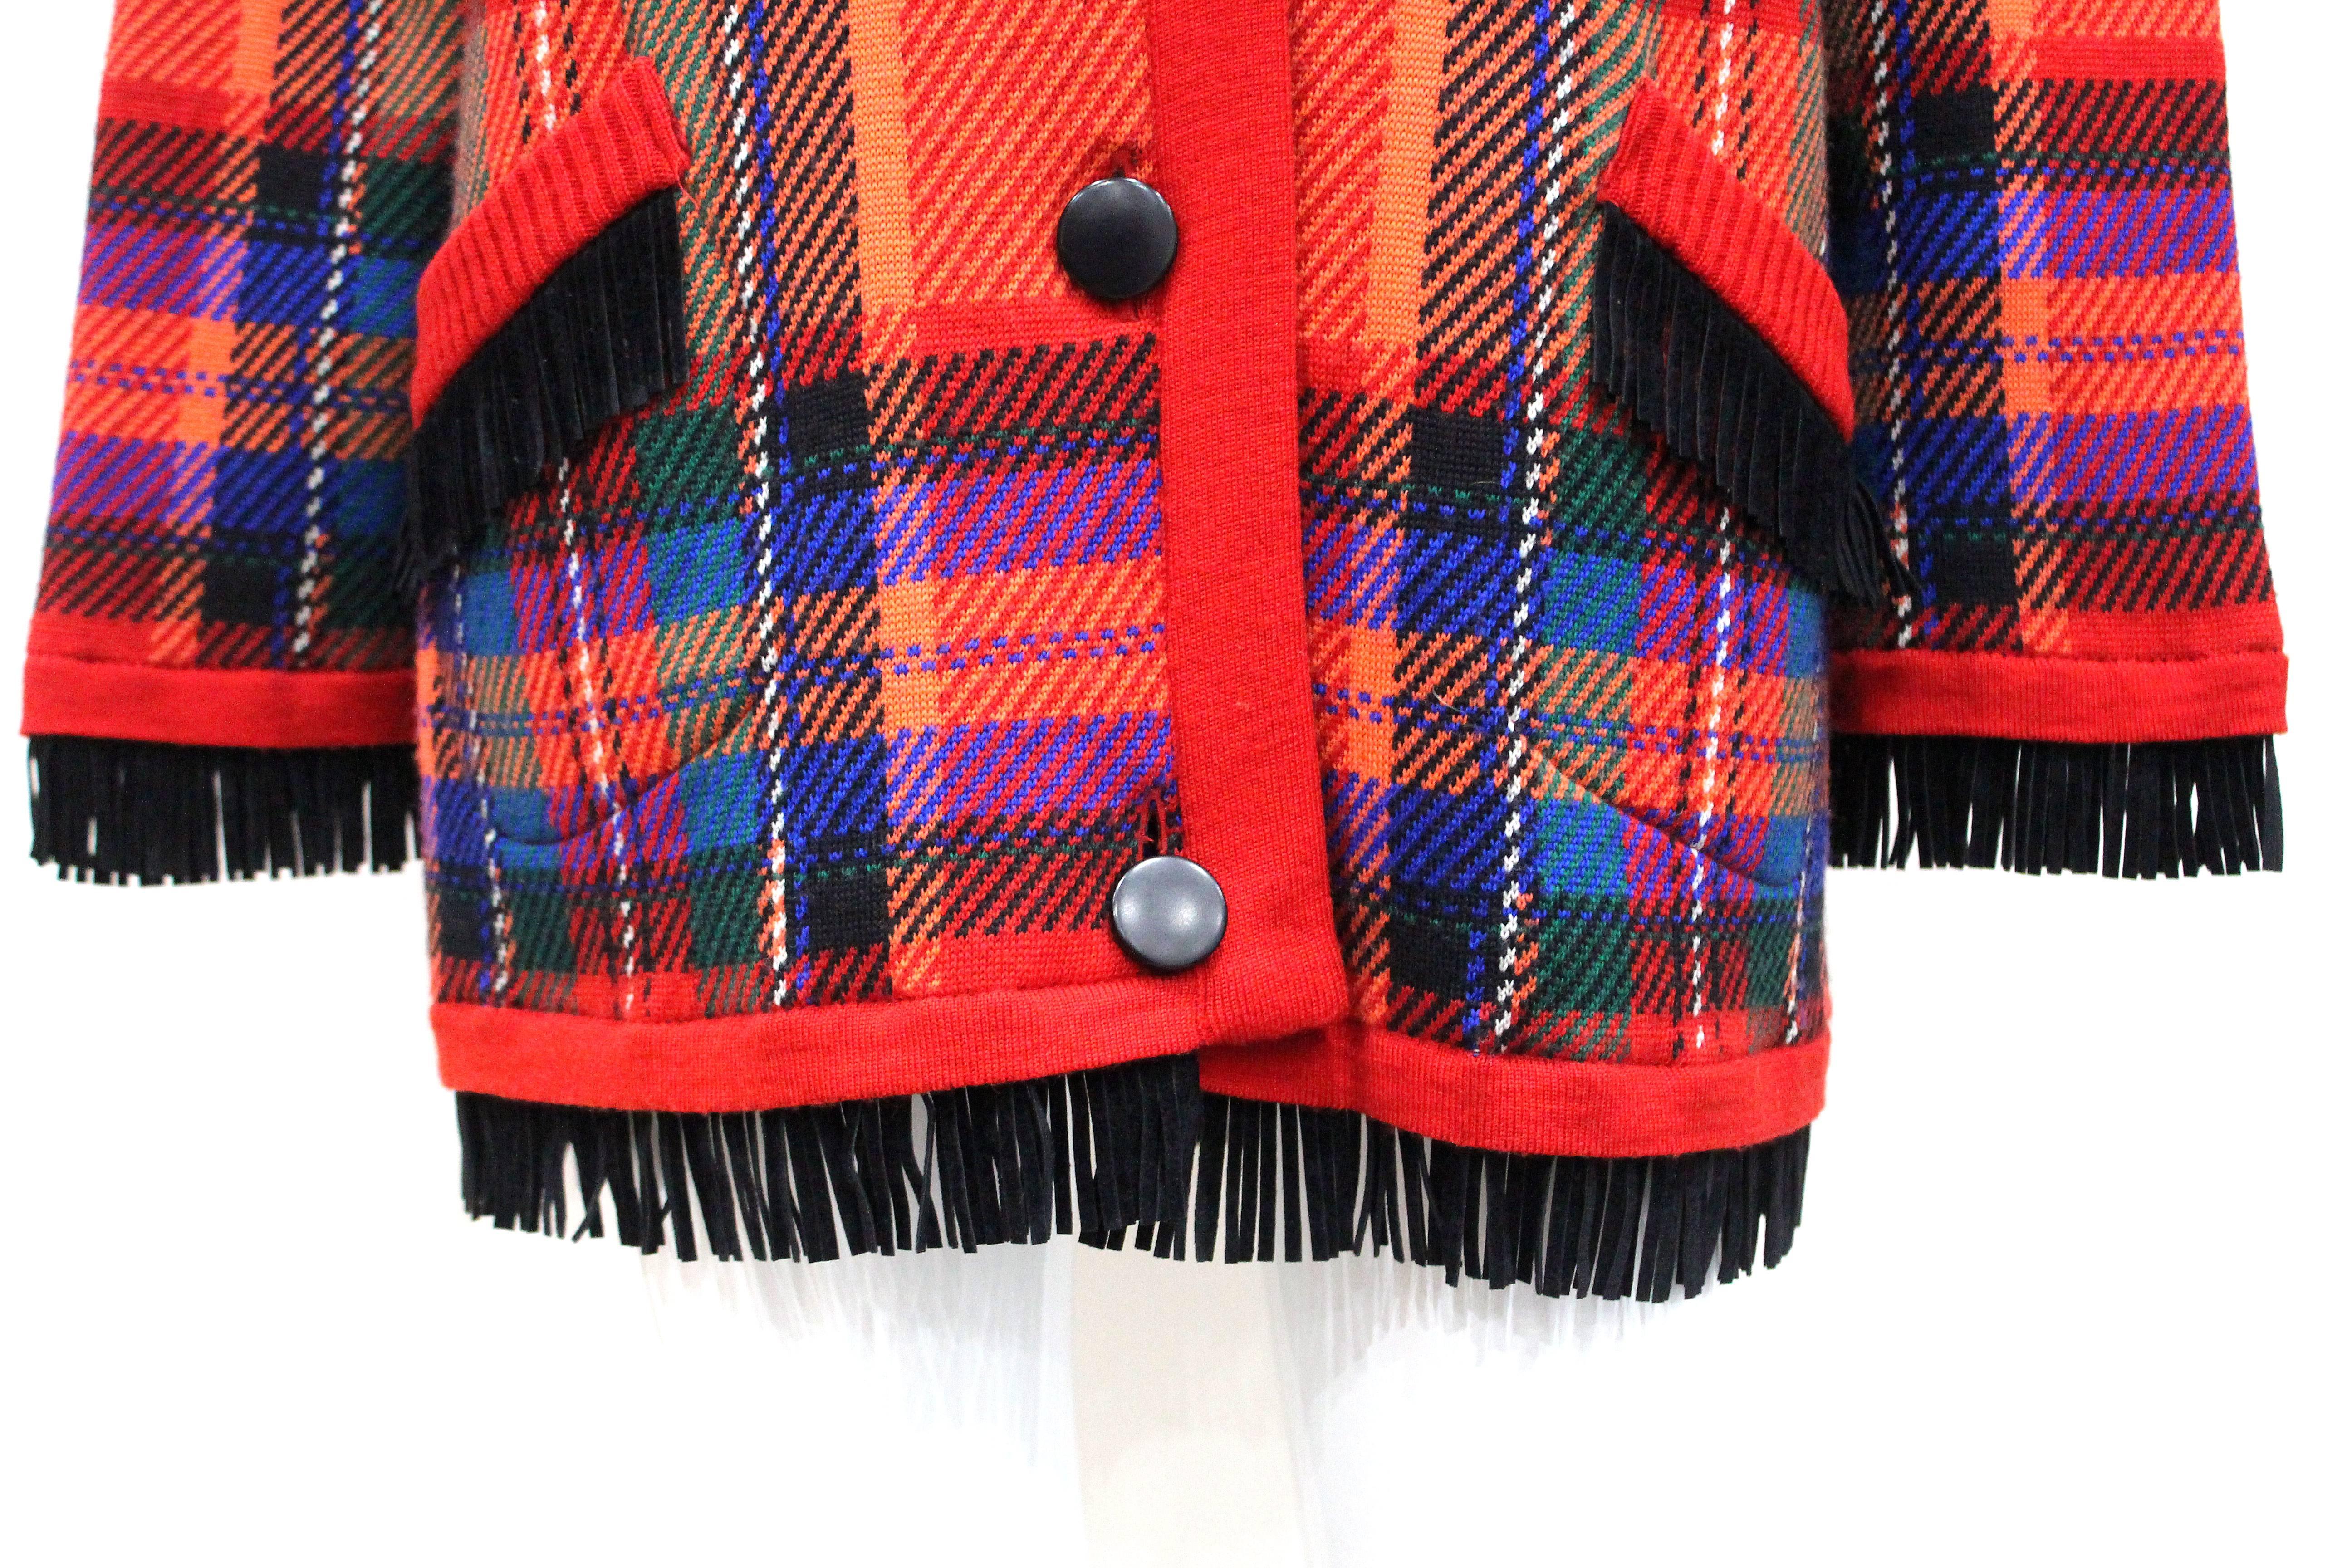 A winter wool cardigan jacket by Yves Saint Laurent from the 1970s. The jacket is in a plaid pattern and has black suede fringing throughout.

Fr 40 

Condition: Overall great vintage condition, the only flaw is a minute snag on the collar which